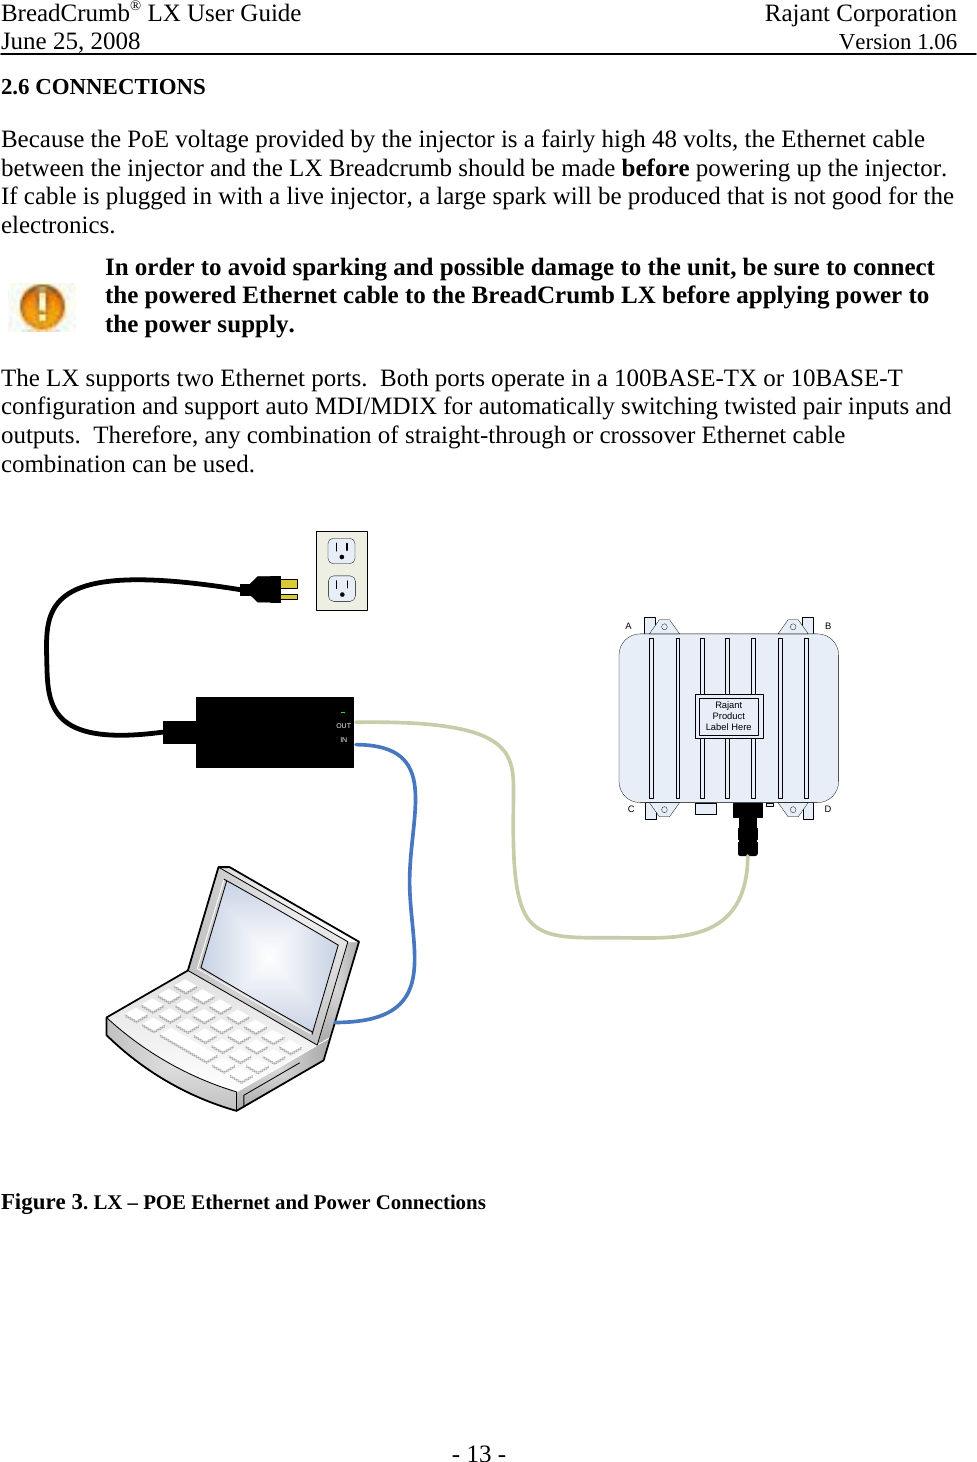 BreadCrumb® LX User Guide  Rajant Corporation  June 25, 2008  Version 1.06 - 13 - 2.6 CONNECTIONS Because the PoE voltage provided by the injector is a fairly high 48 volts, the Ethernet cable between the injector and the LX Breadcrumb should be made before powering up the injector.  If cable is plugged in with a live injector, a large spark will be produced that is not good for the electronics.  In order to avoid sparking and possible damage to the unit, be sure to connect the powered Ethernet cable to the BreadCrumb LX before applying power to the power supply. The LX supports two Ethernet ports.  Both ports operate in a 100BASE-TX or 10BASE-T configuration and support auto MDI/MDIX for automatically switching twisted pair inputs and outputs.  Therefore, any combination of straight-through or crossover Ethernet cable combination can be used. Rajant Product Label HereABCDINOUT Figure 3. LX – POE Ethernet and Power Connections      